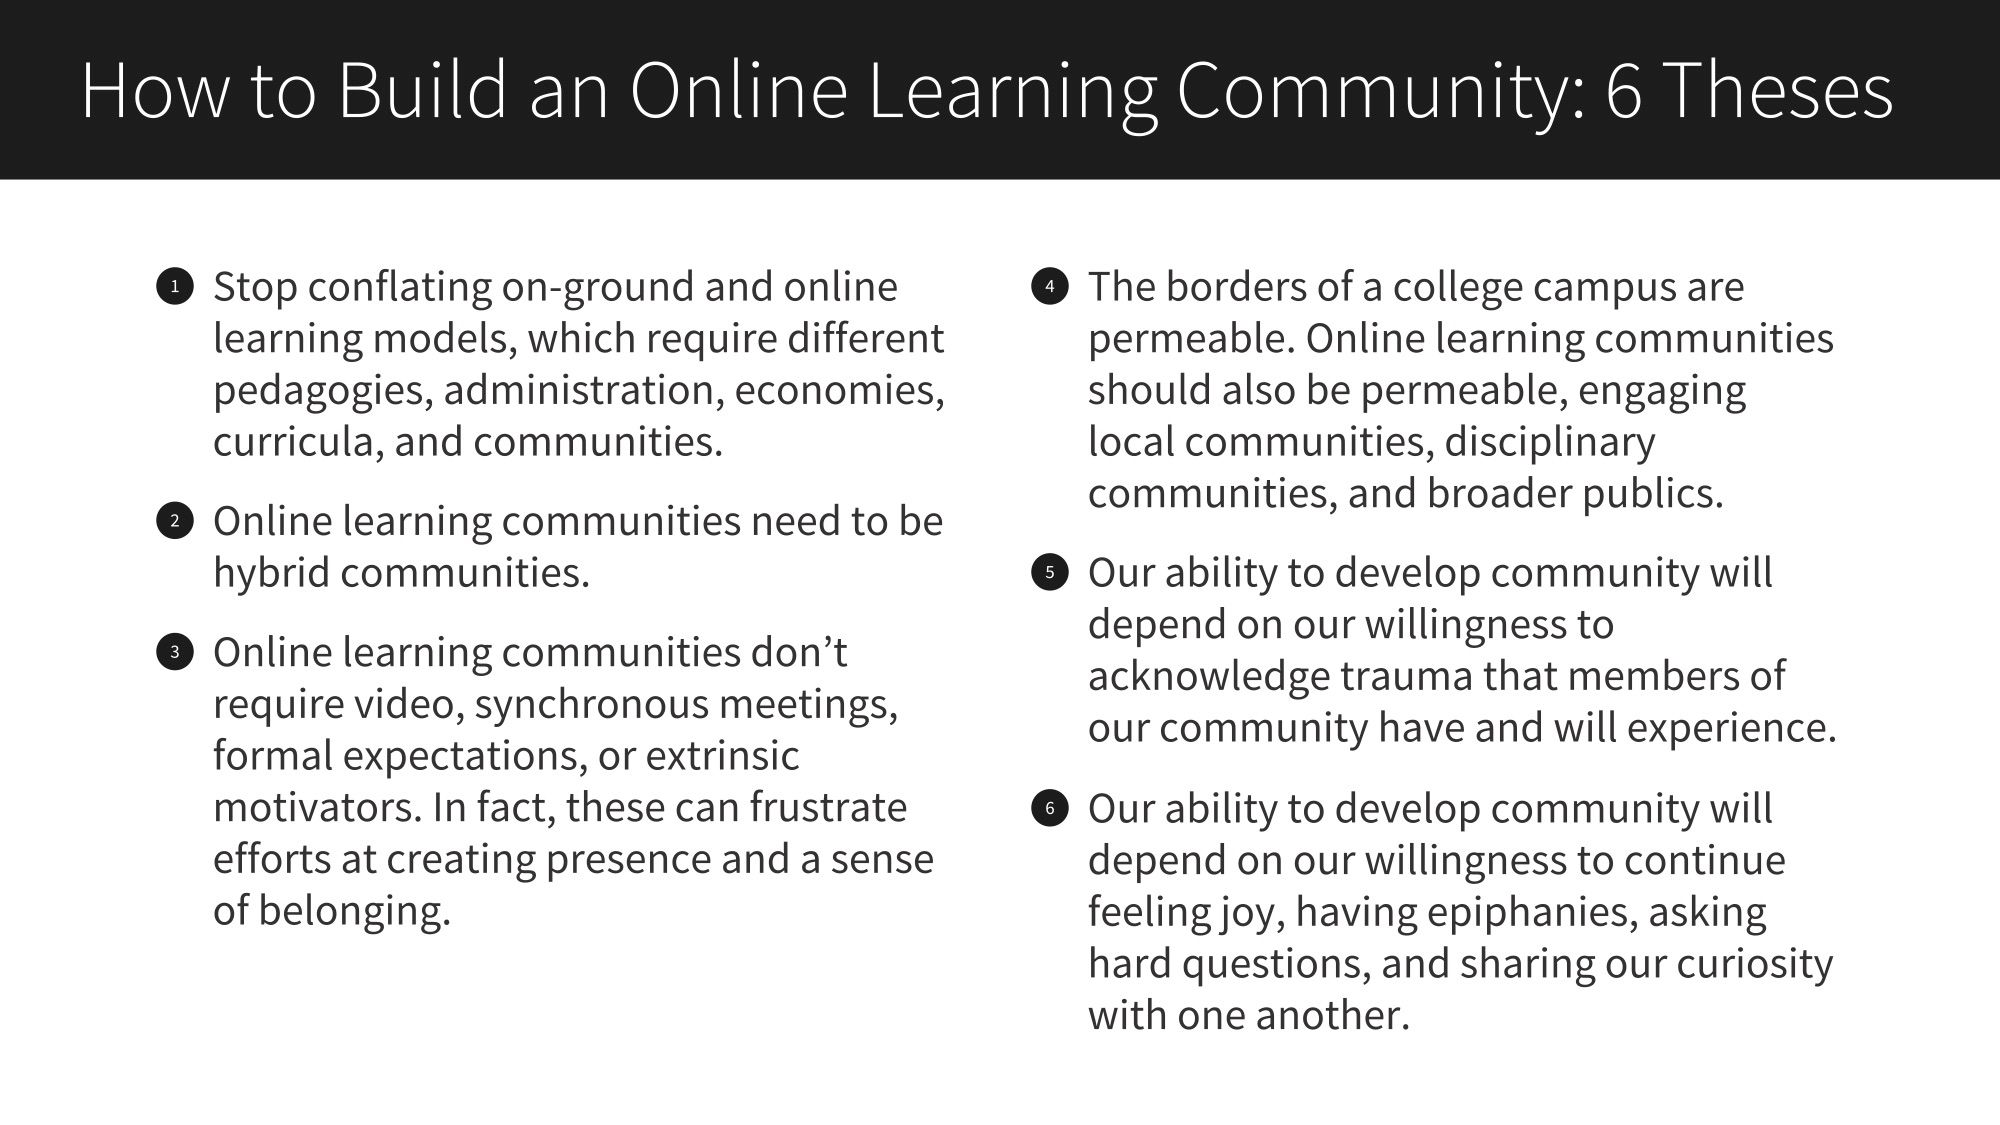 How to Build an Online Learning Community: 6 Theses